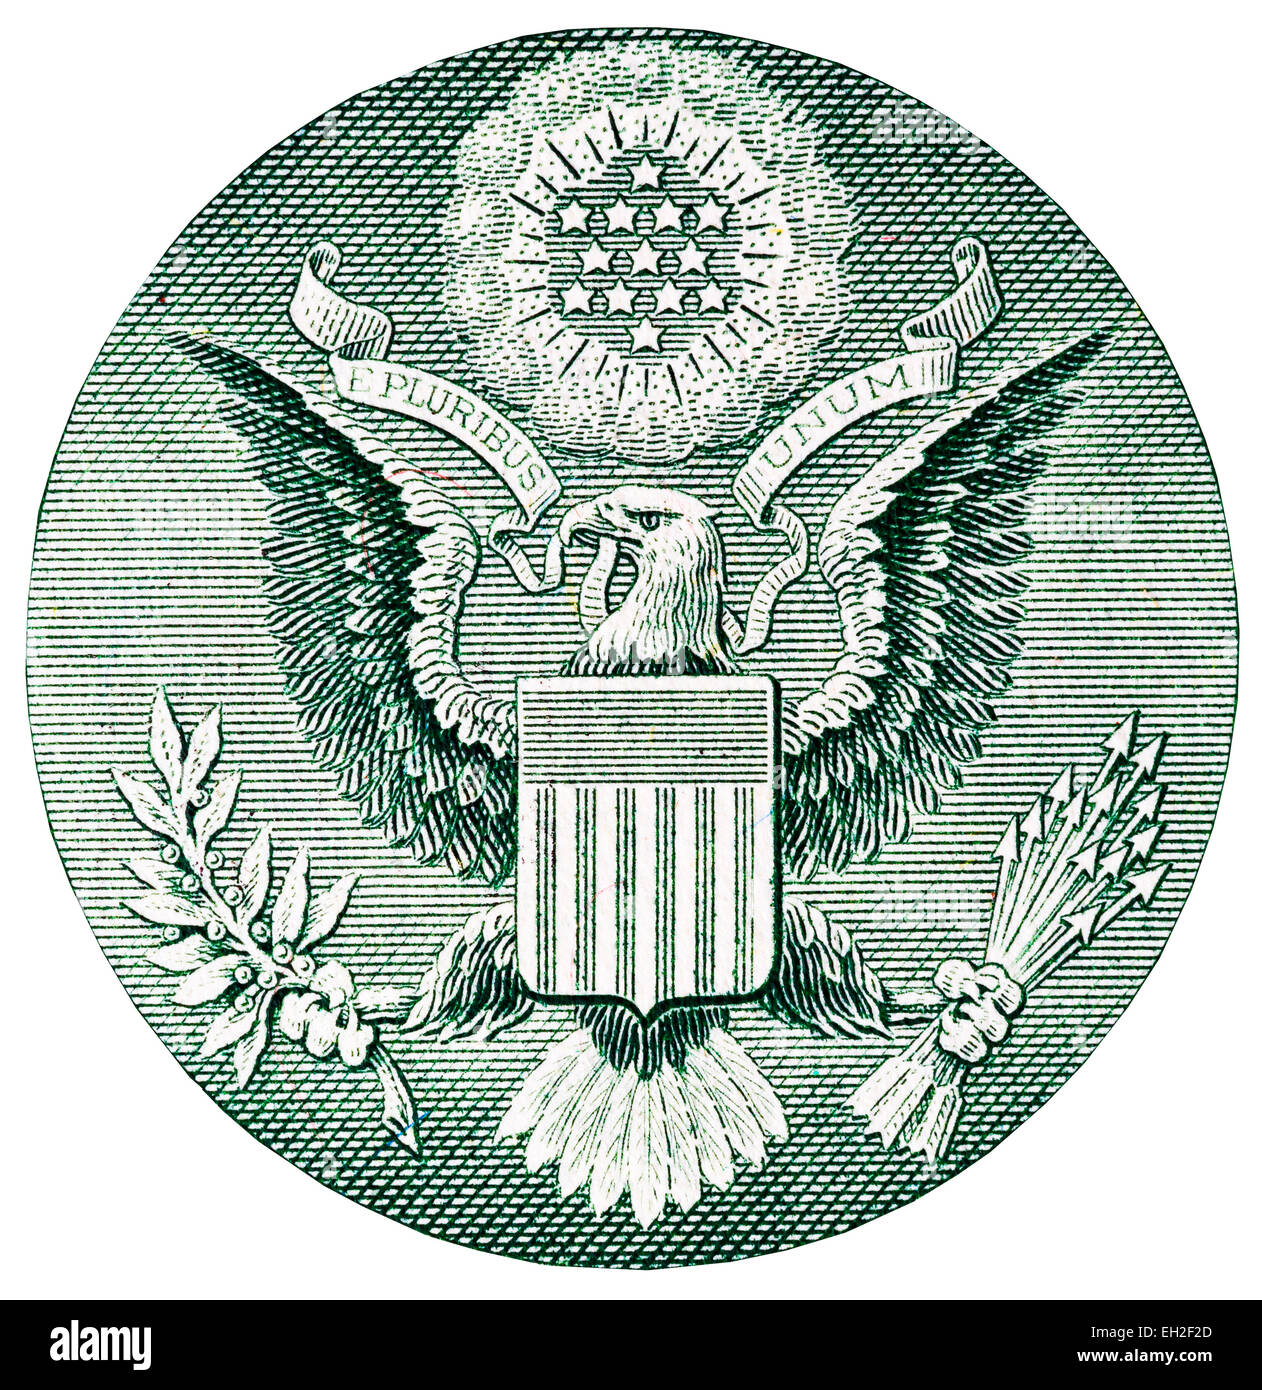 Coat of arms with an American eagle from 1 dollar banknote, USA, 2009 Stock Photo